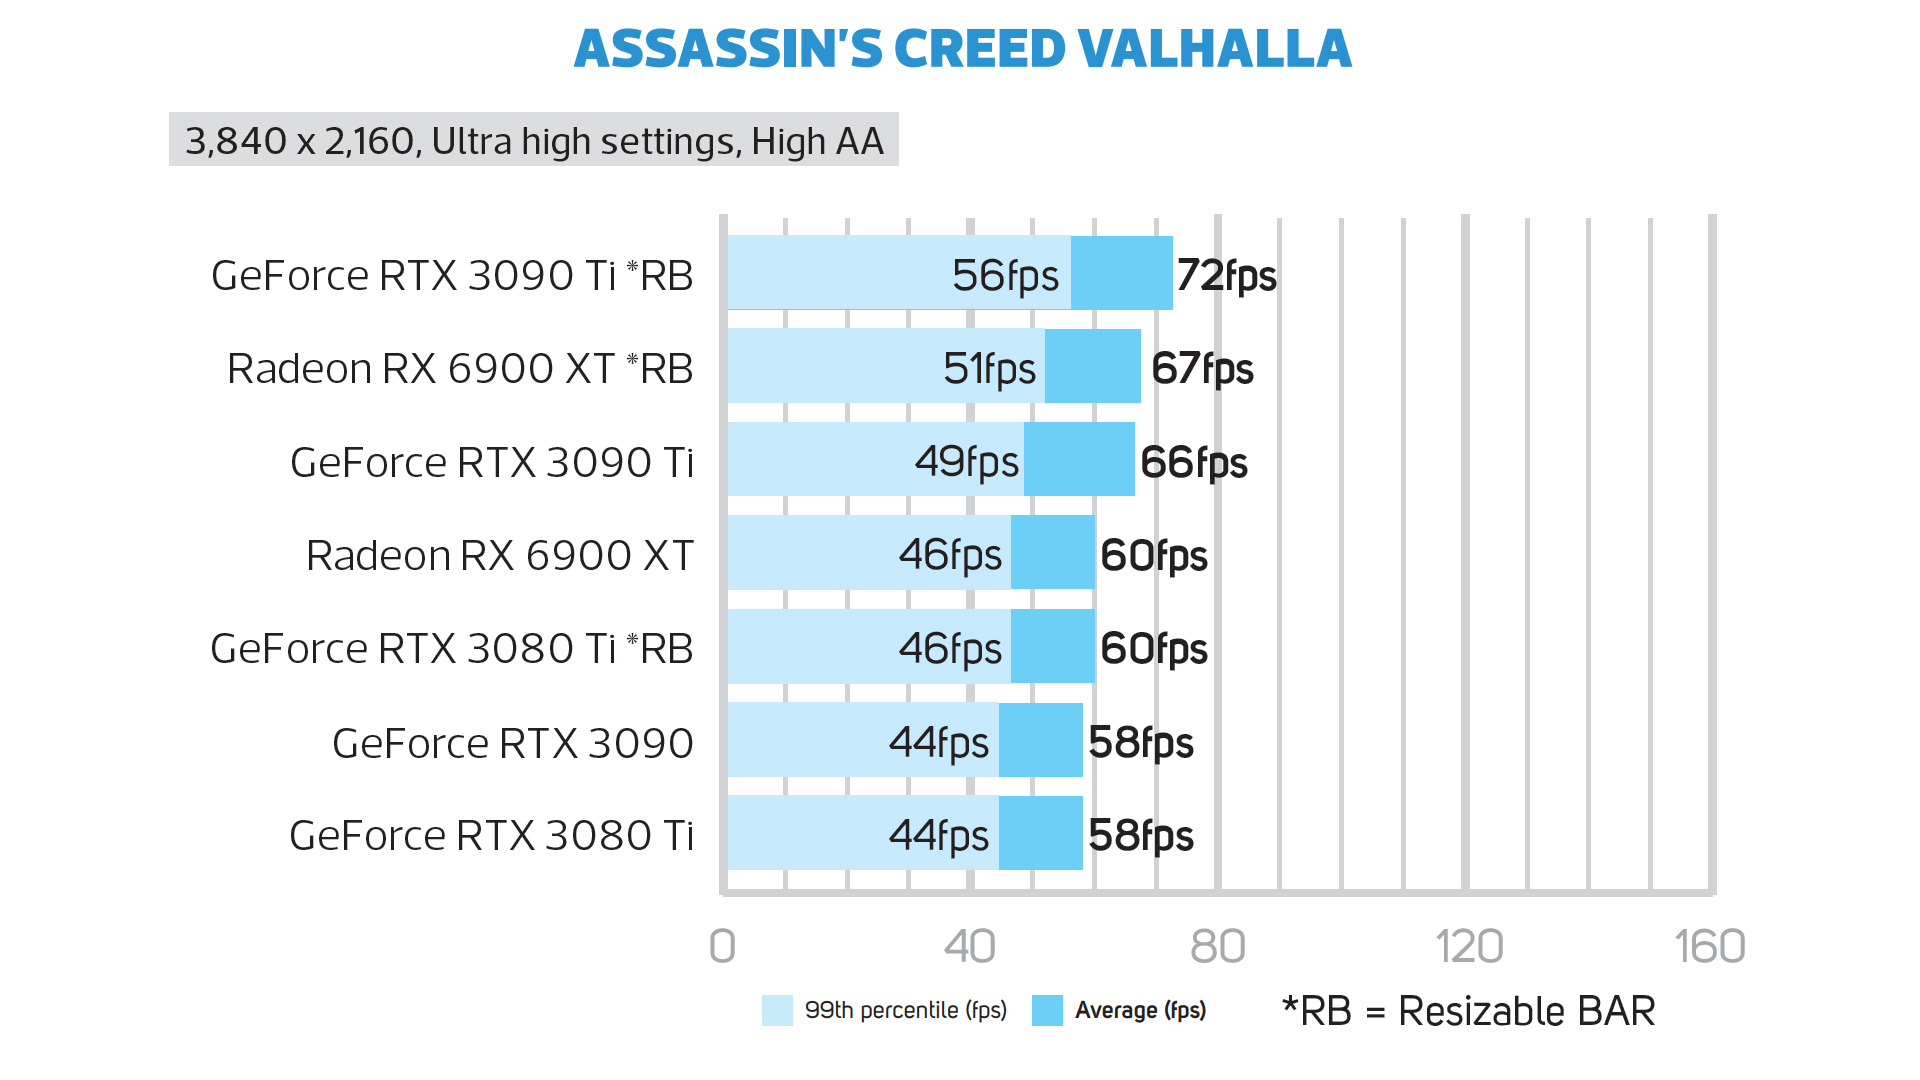 GeForce RTX 3090 Ti Assassin's Creed Valhalla 4K frame rate